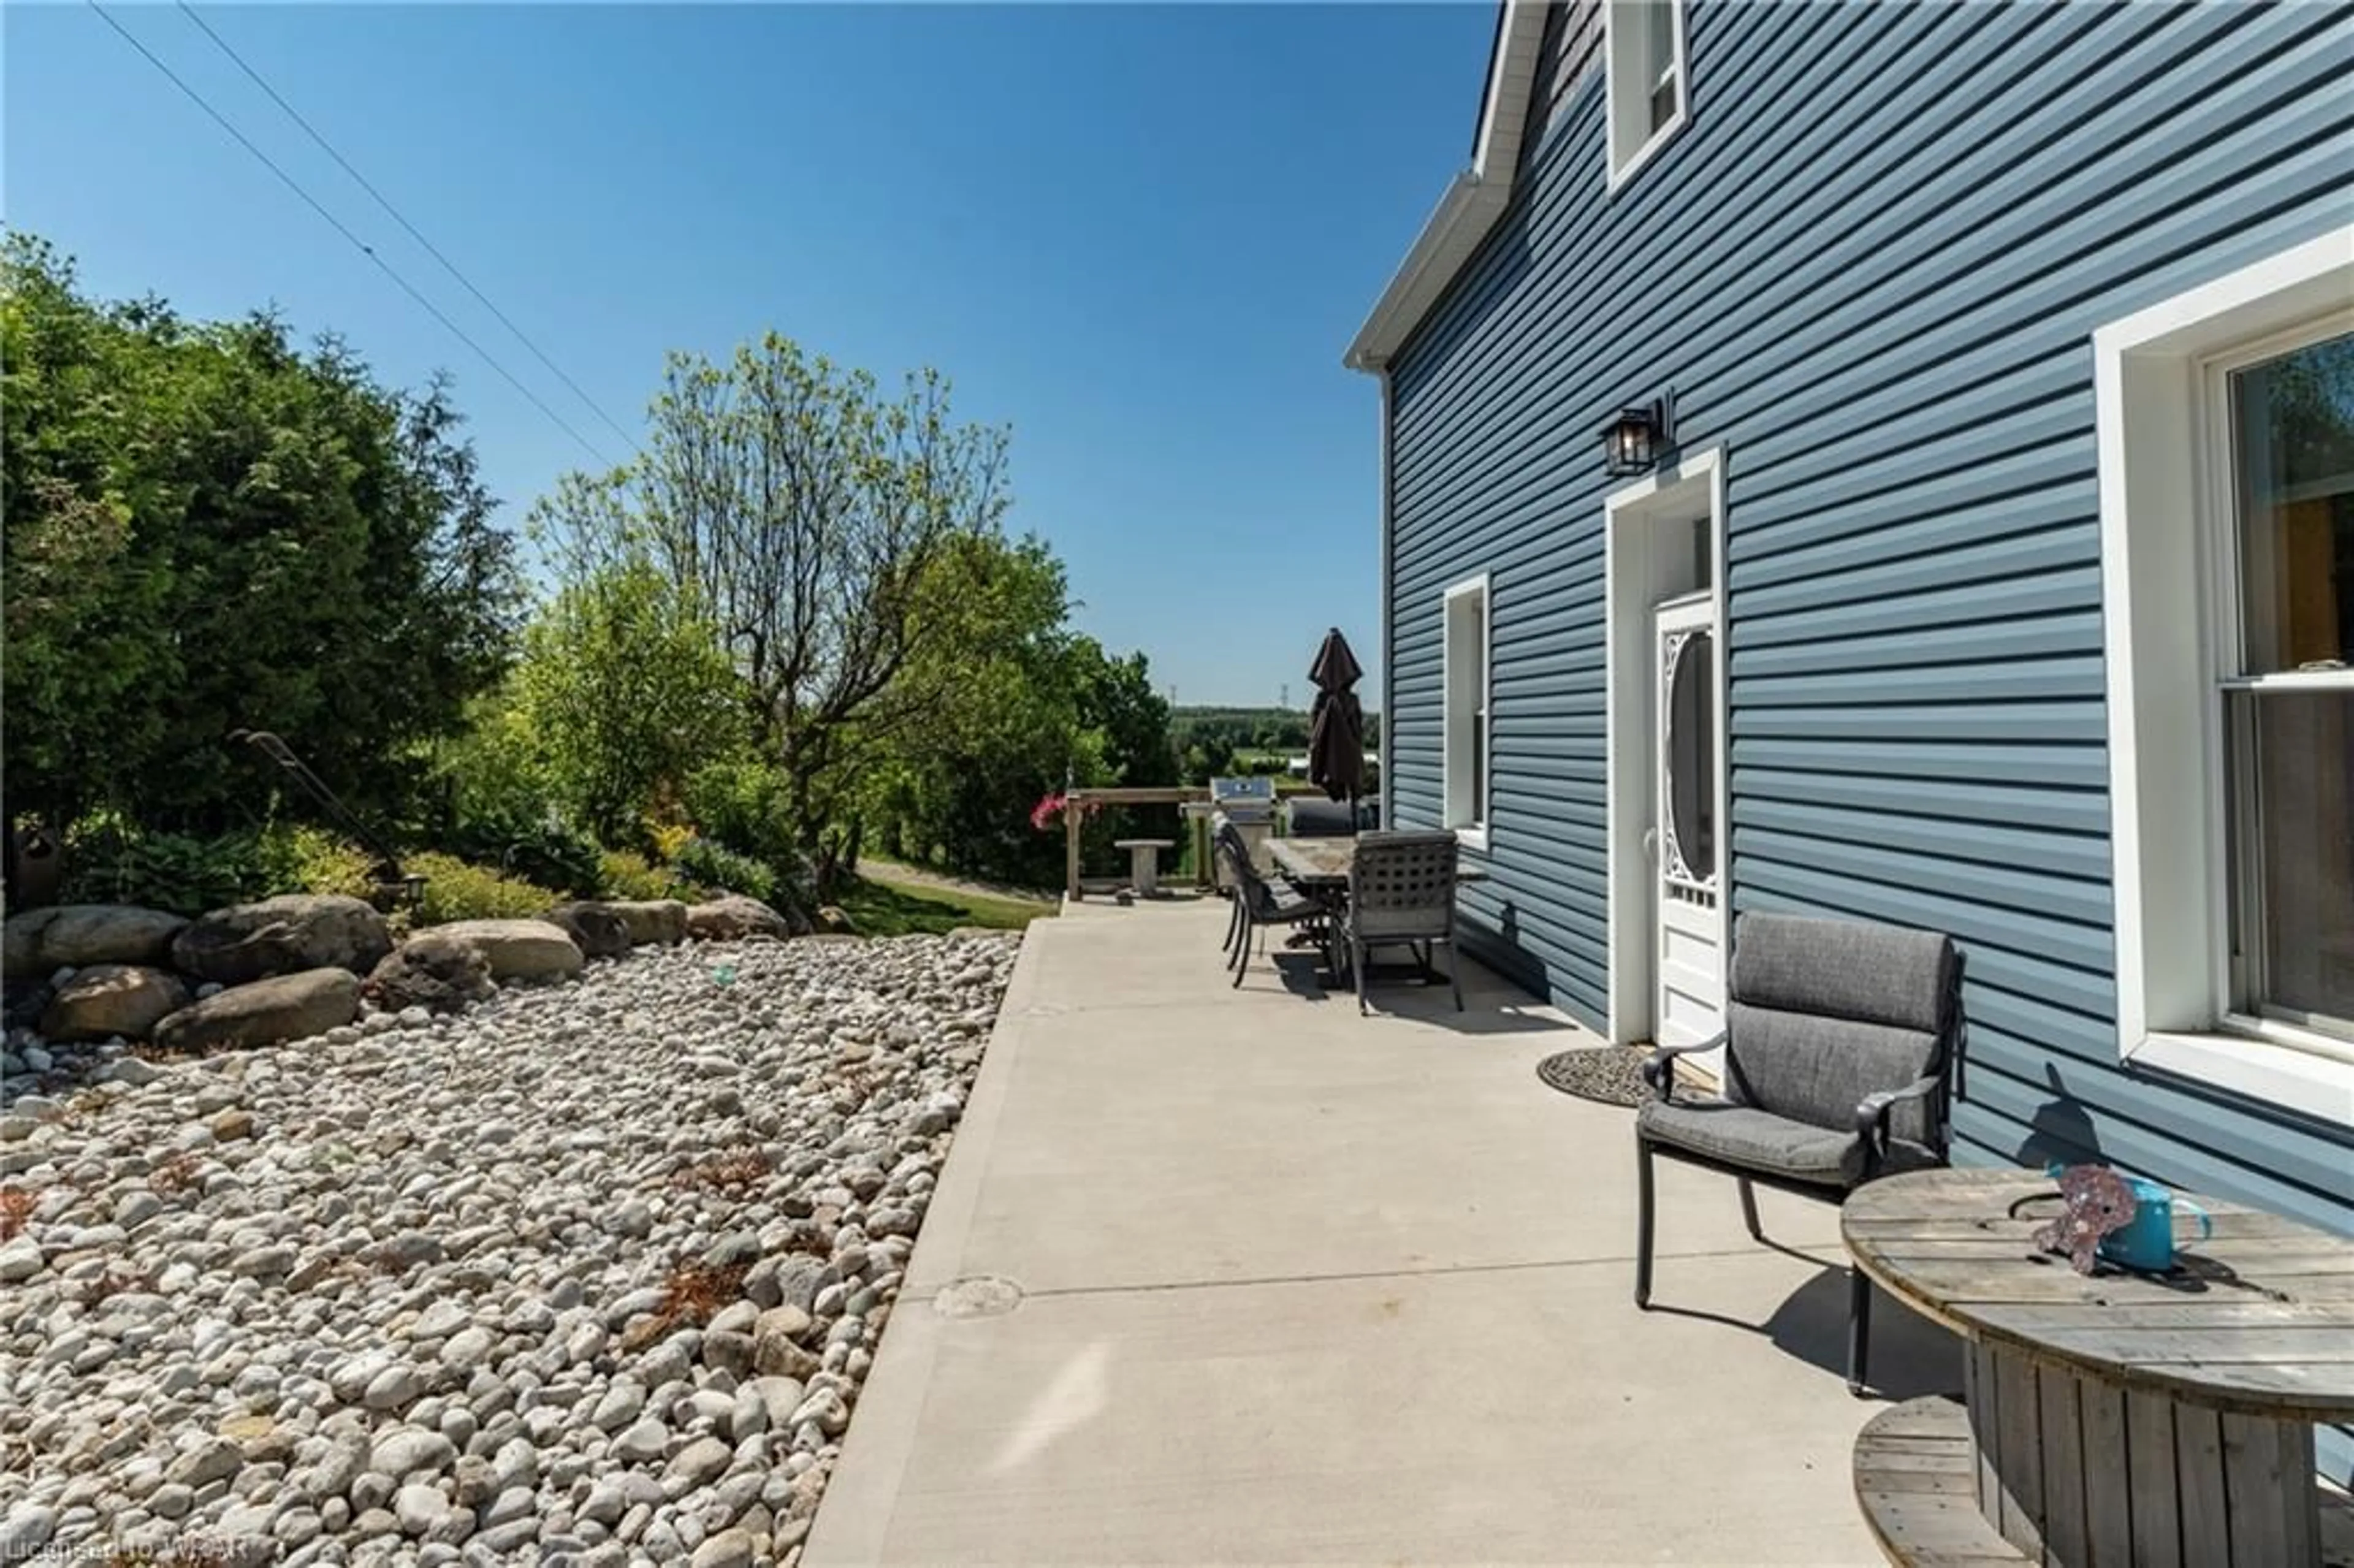 Patio for 233154 Concession 2 Wgr Rd, Durham Ontario N0G 1R0